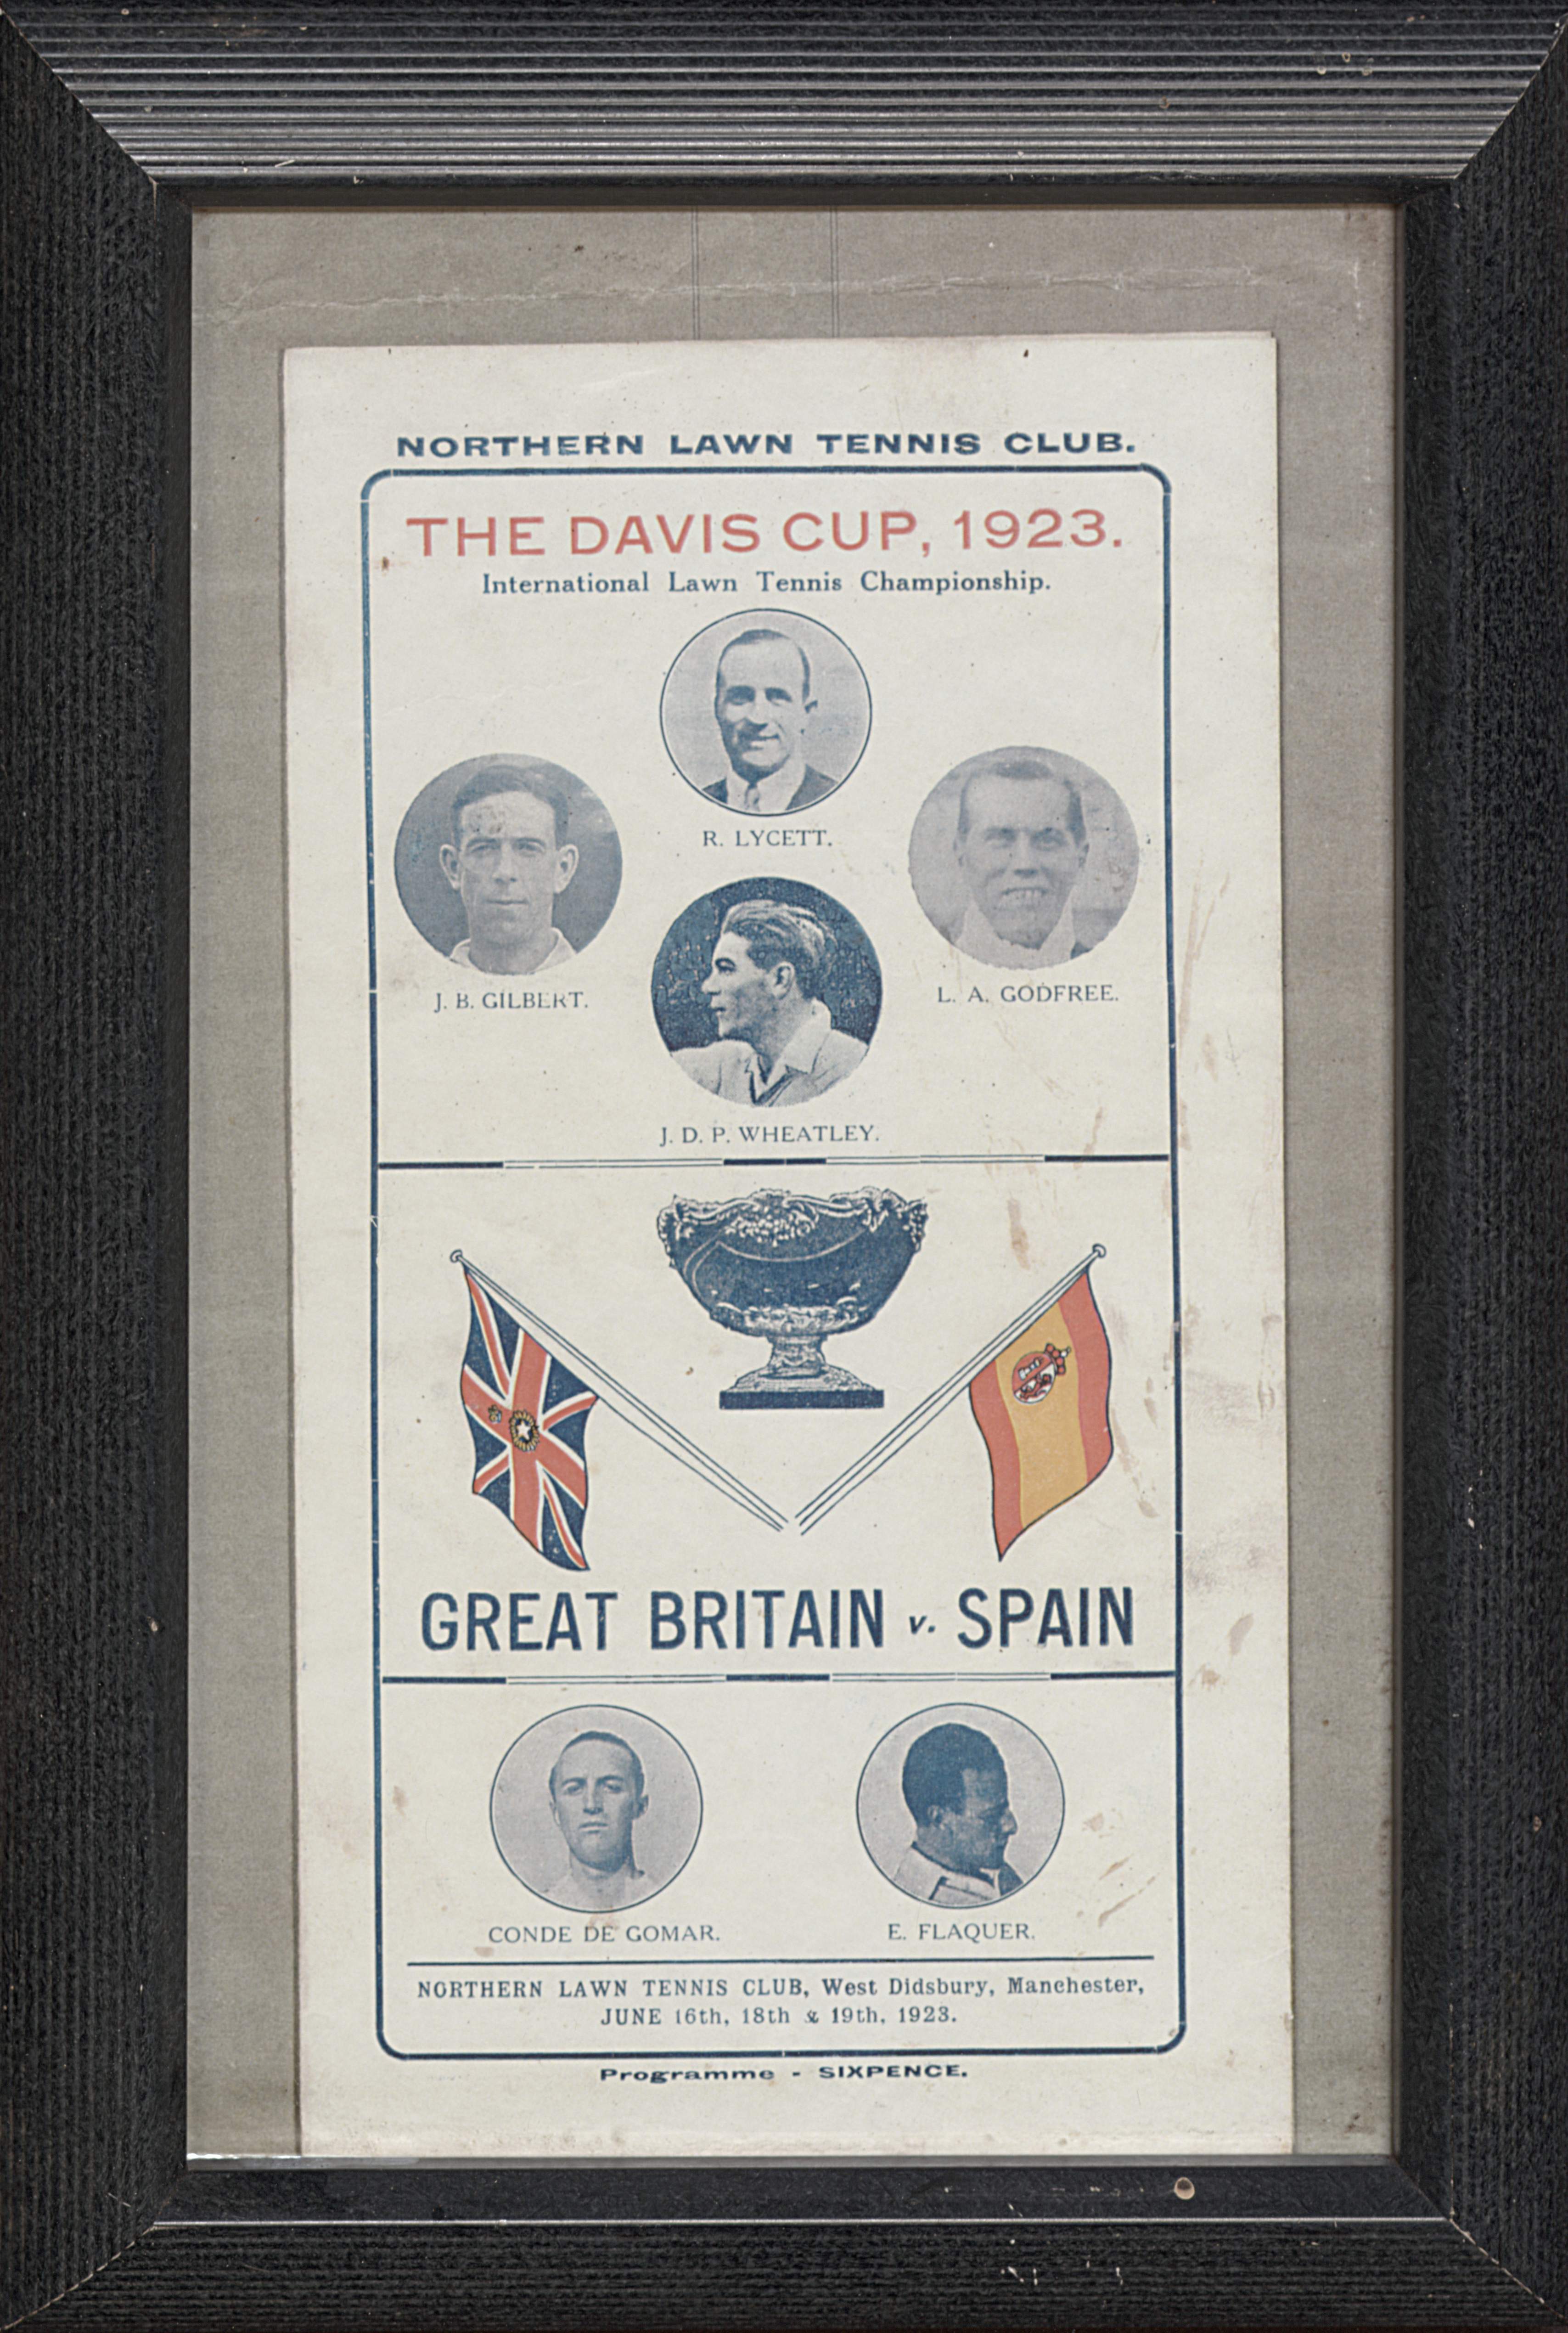 The Davis Cup 1923 framed picture